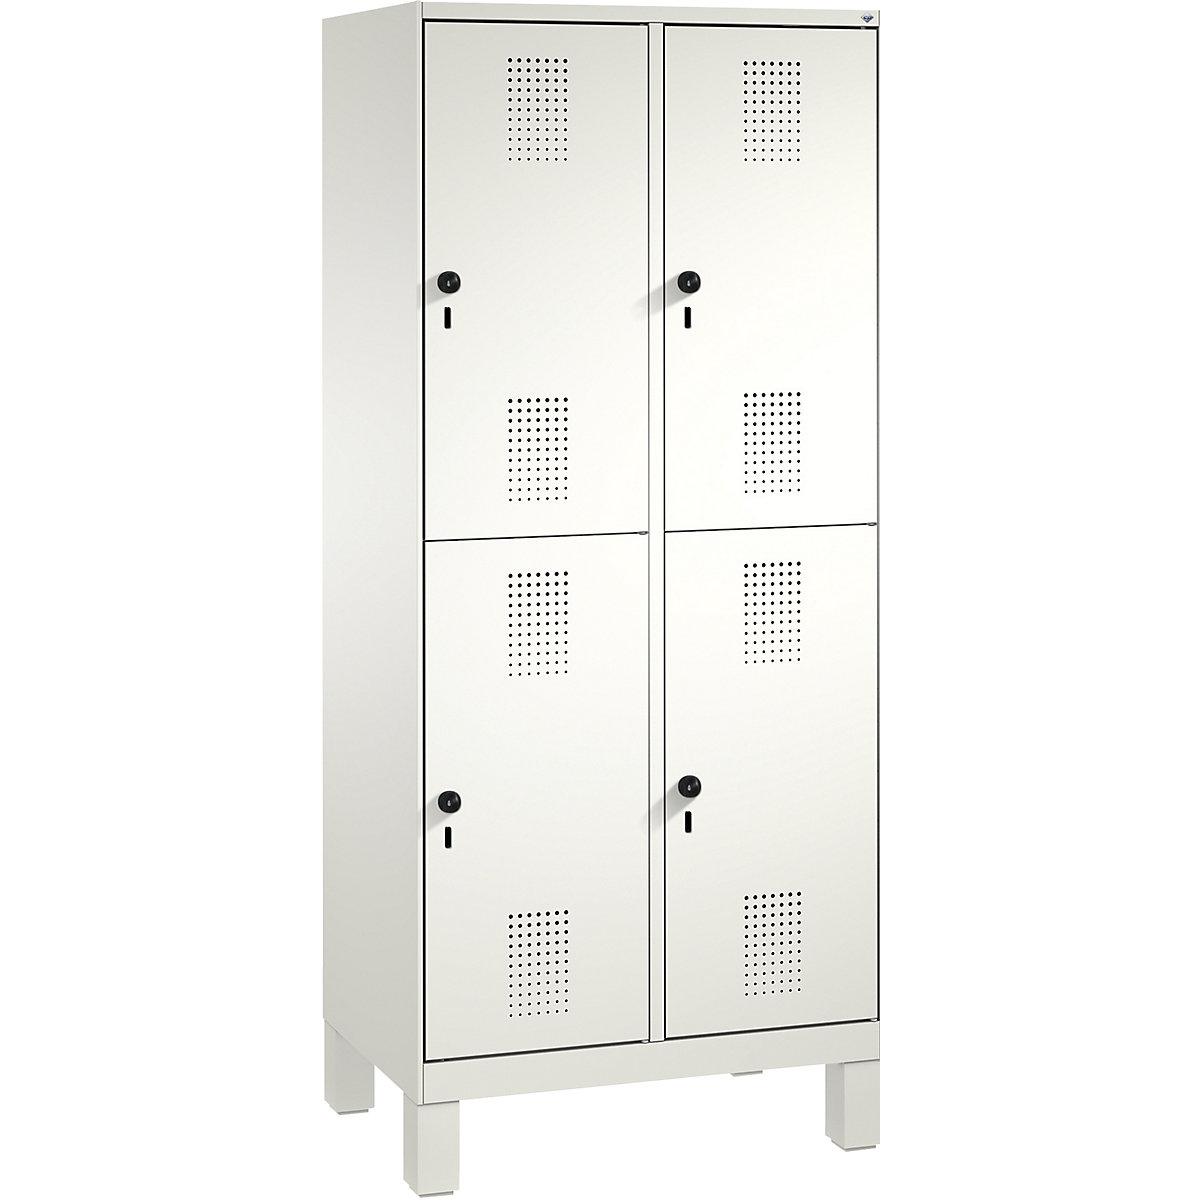 EVOLO cloakroom locker, double tier, with feet – C+P, 2 compartments, 2 shelf compartments each, compartment width 400 mm, traffic white / traffic white-7